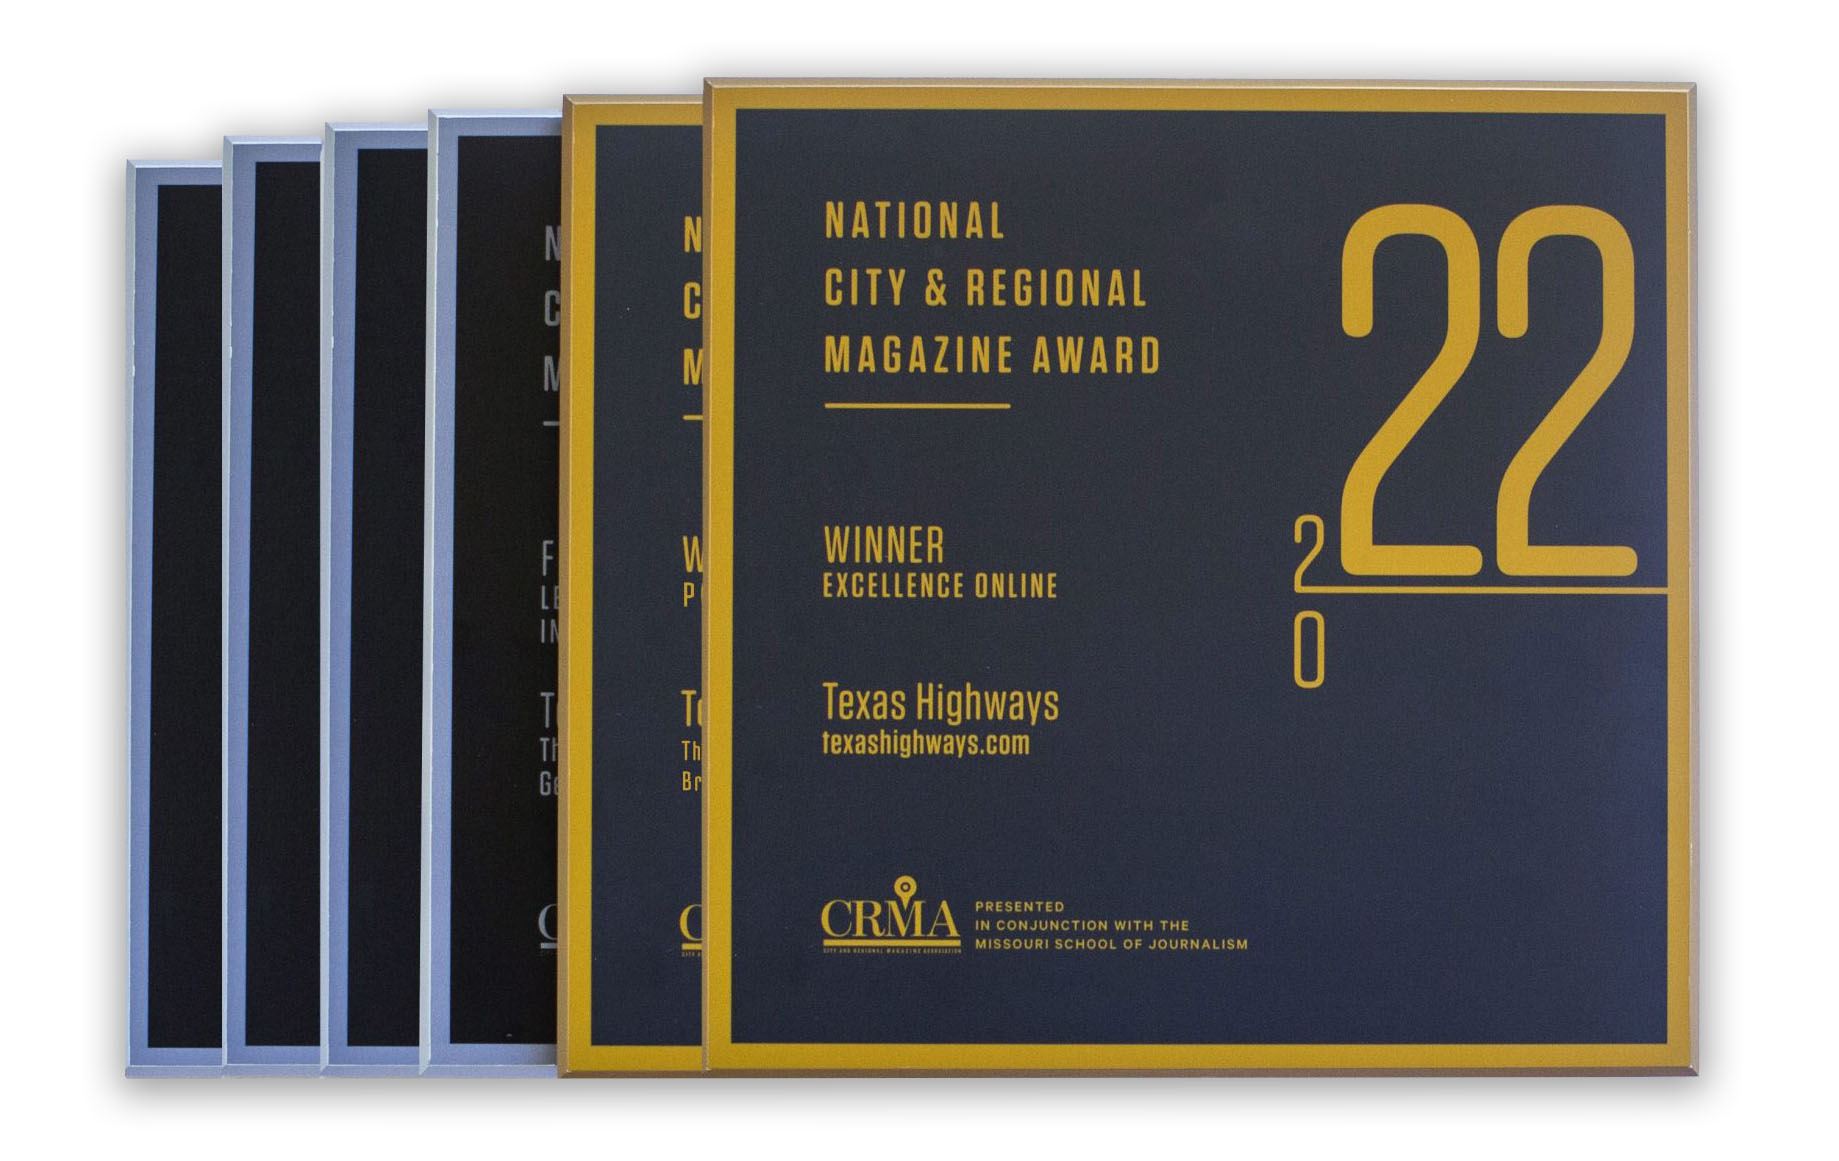 A stack of award plaques